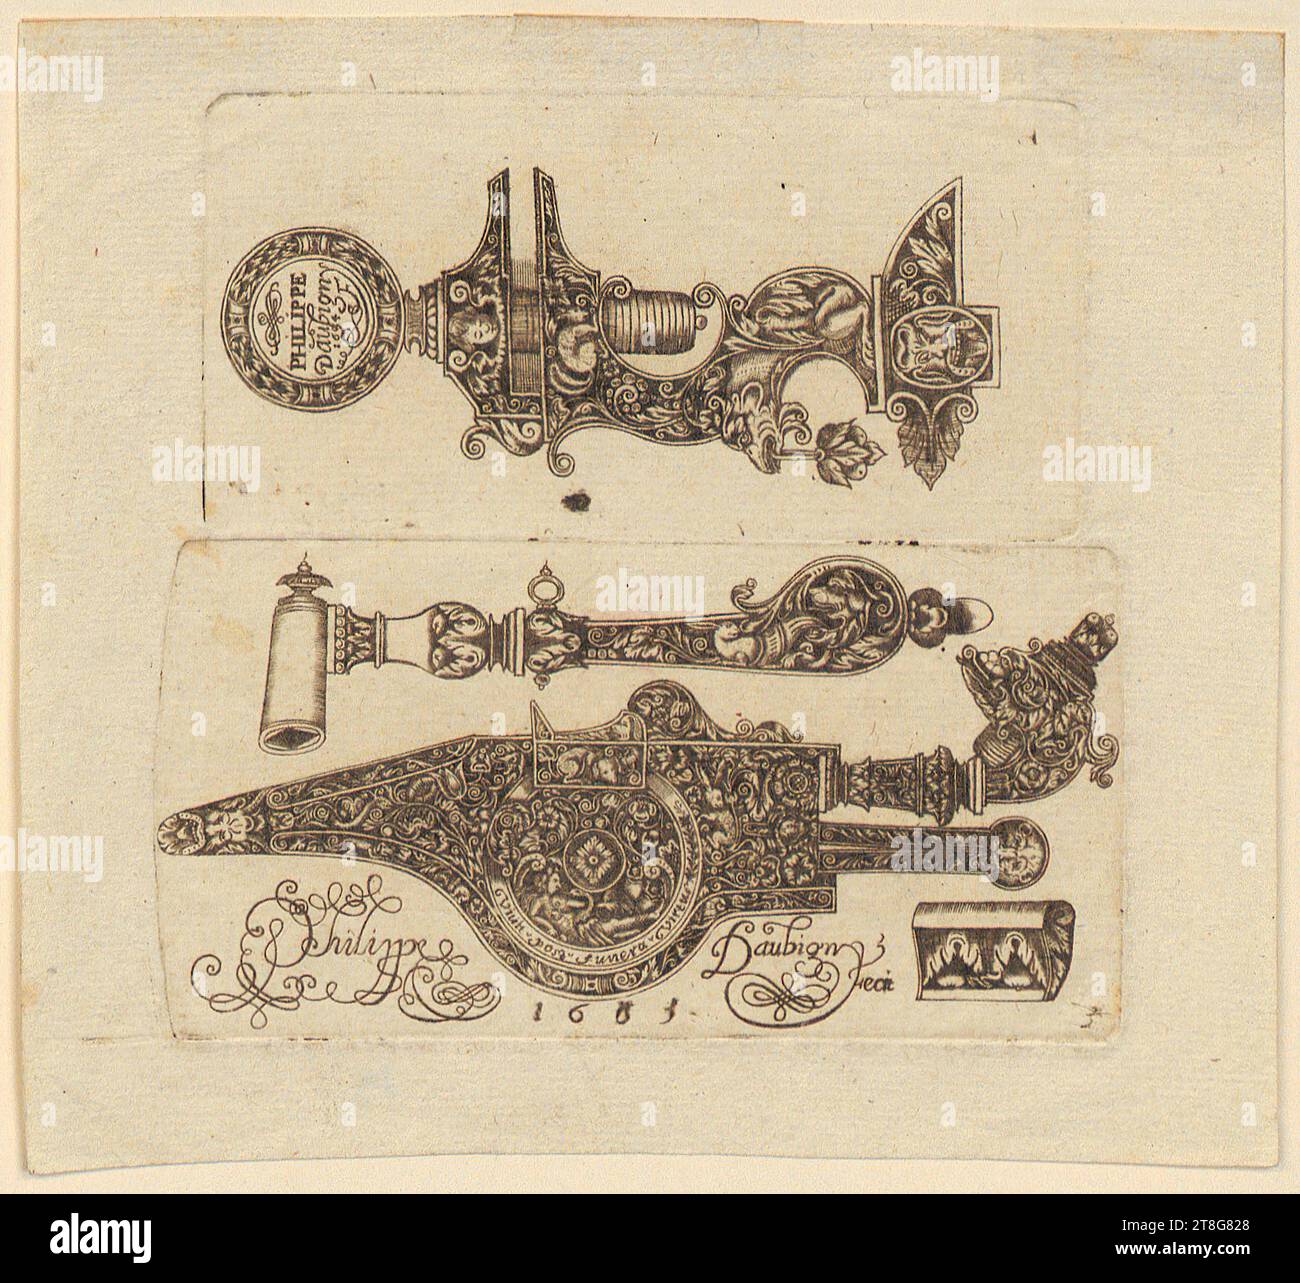 Philippe Daubigny (1634, 1665 mentioned around), Gun parts and fittings, sheet 3 and 9 of the set 'Ornate gun locks and other ornaments', origin of the print medium: 1634 - 1665, copper engraving, sheet size: 12. 5 x 13.8 cm plate margin: 4.9 x 9.6 cm (upper plate)plate margin: Approx. 5.5 x 10.5, upper plate: Upper left signed and dated 'PHILIPPE, Daubigny, 1634, F'; lower right nummer Stock Photo